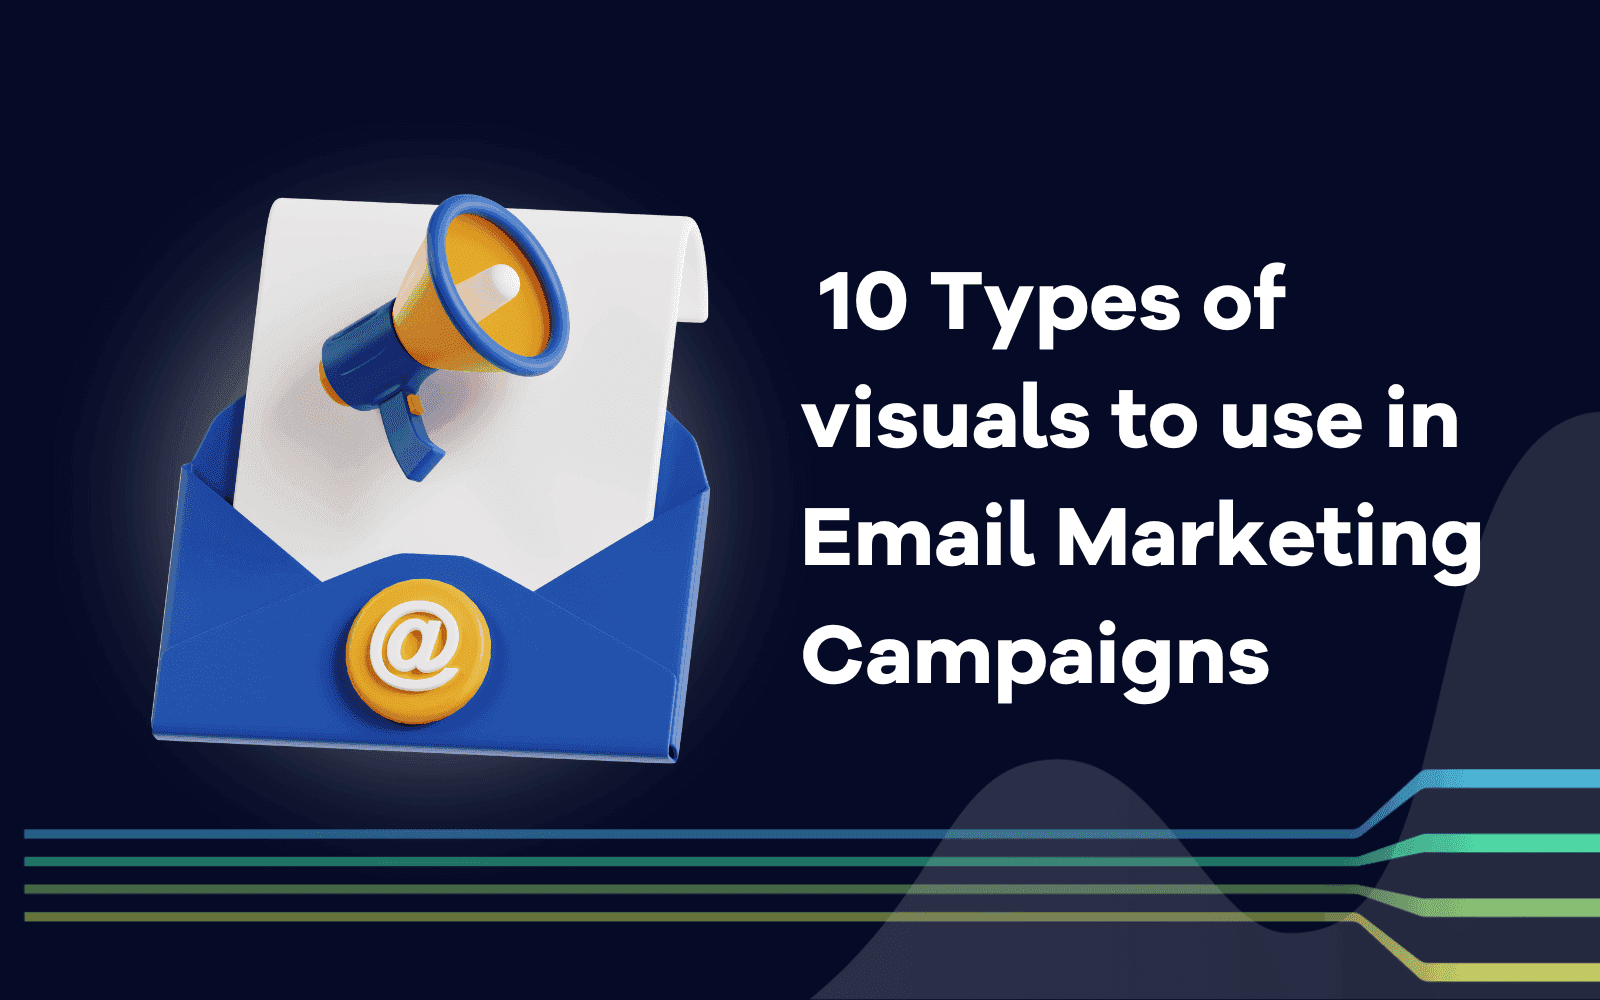 Types of visuals to use in Email Marketing Campaigns